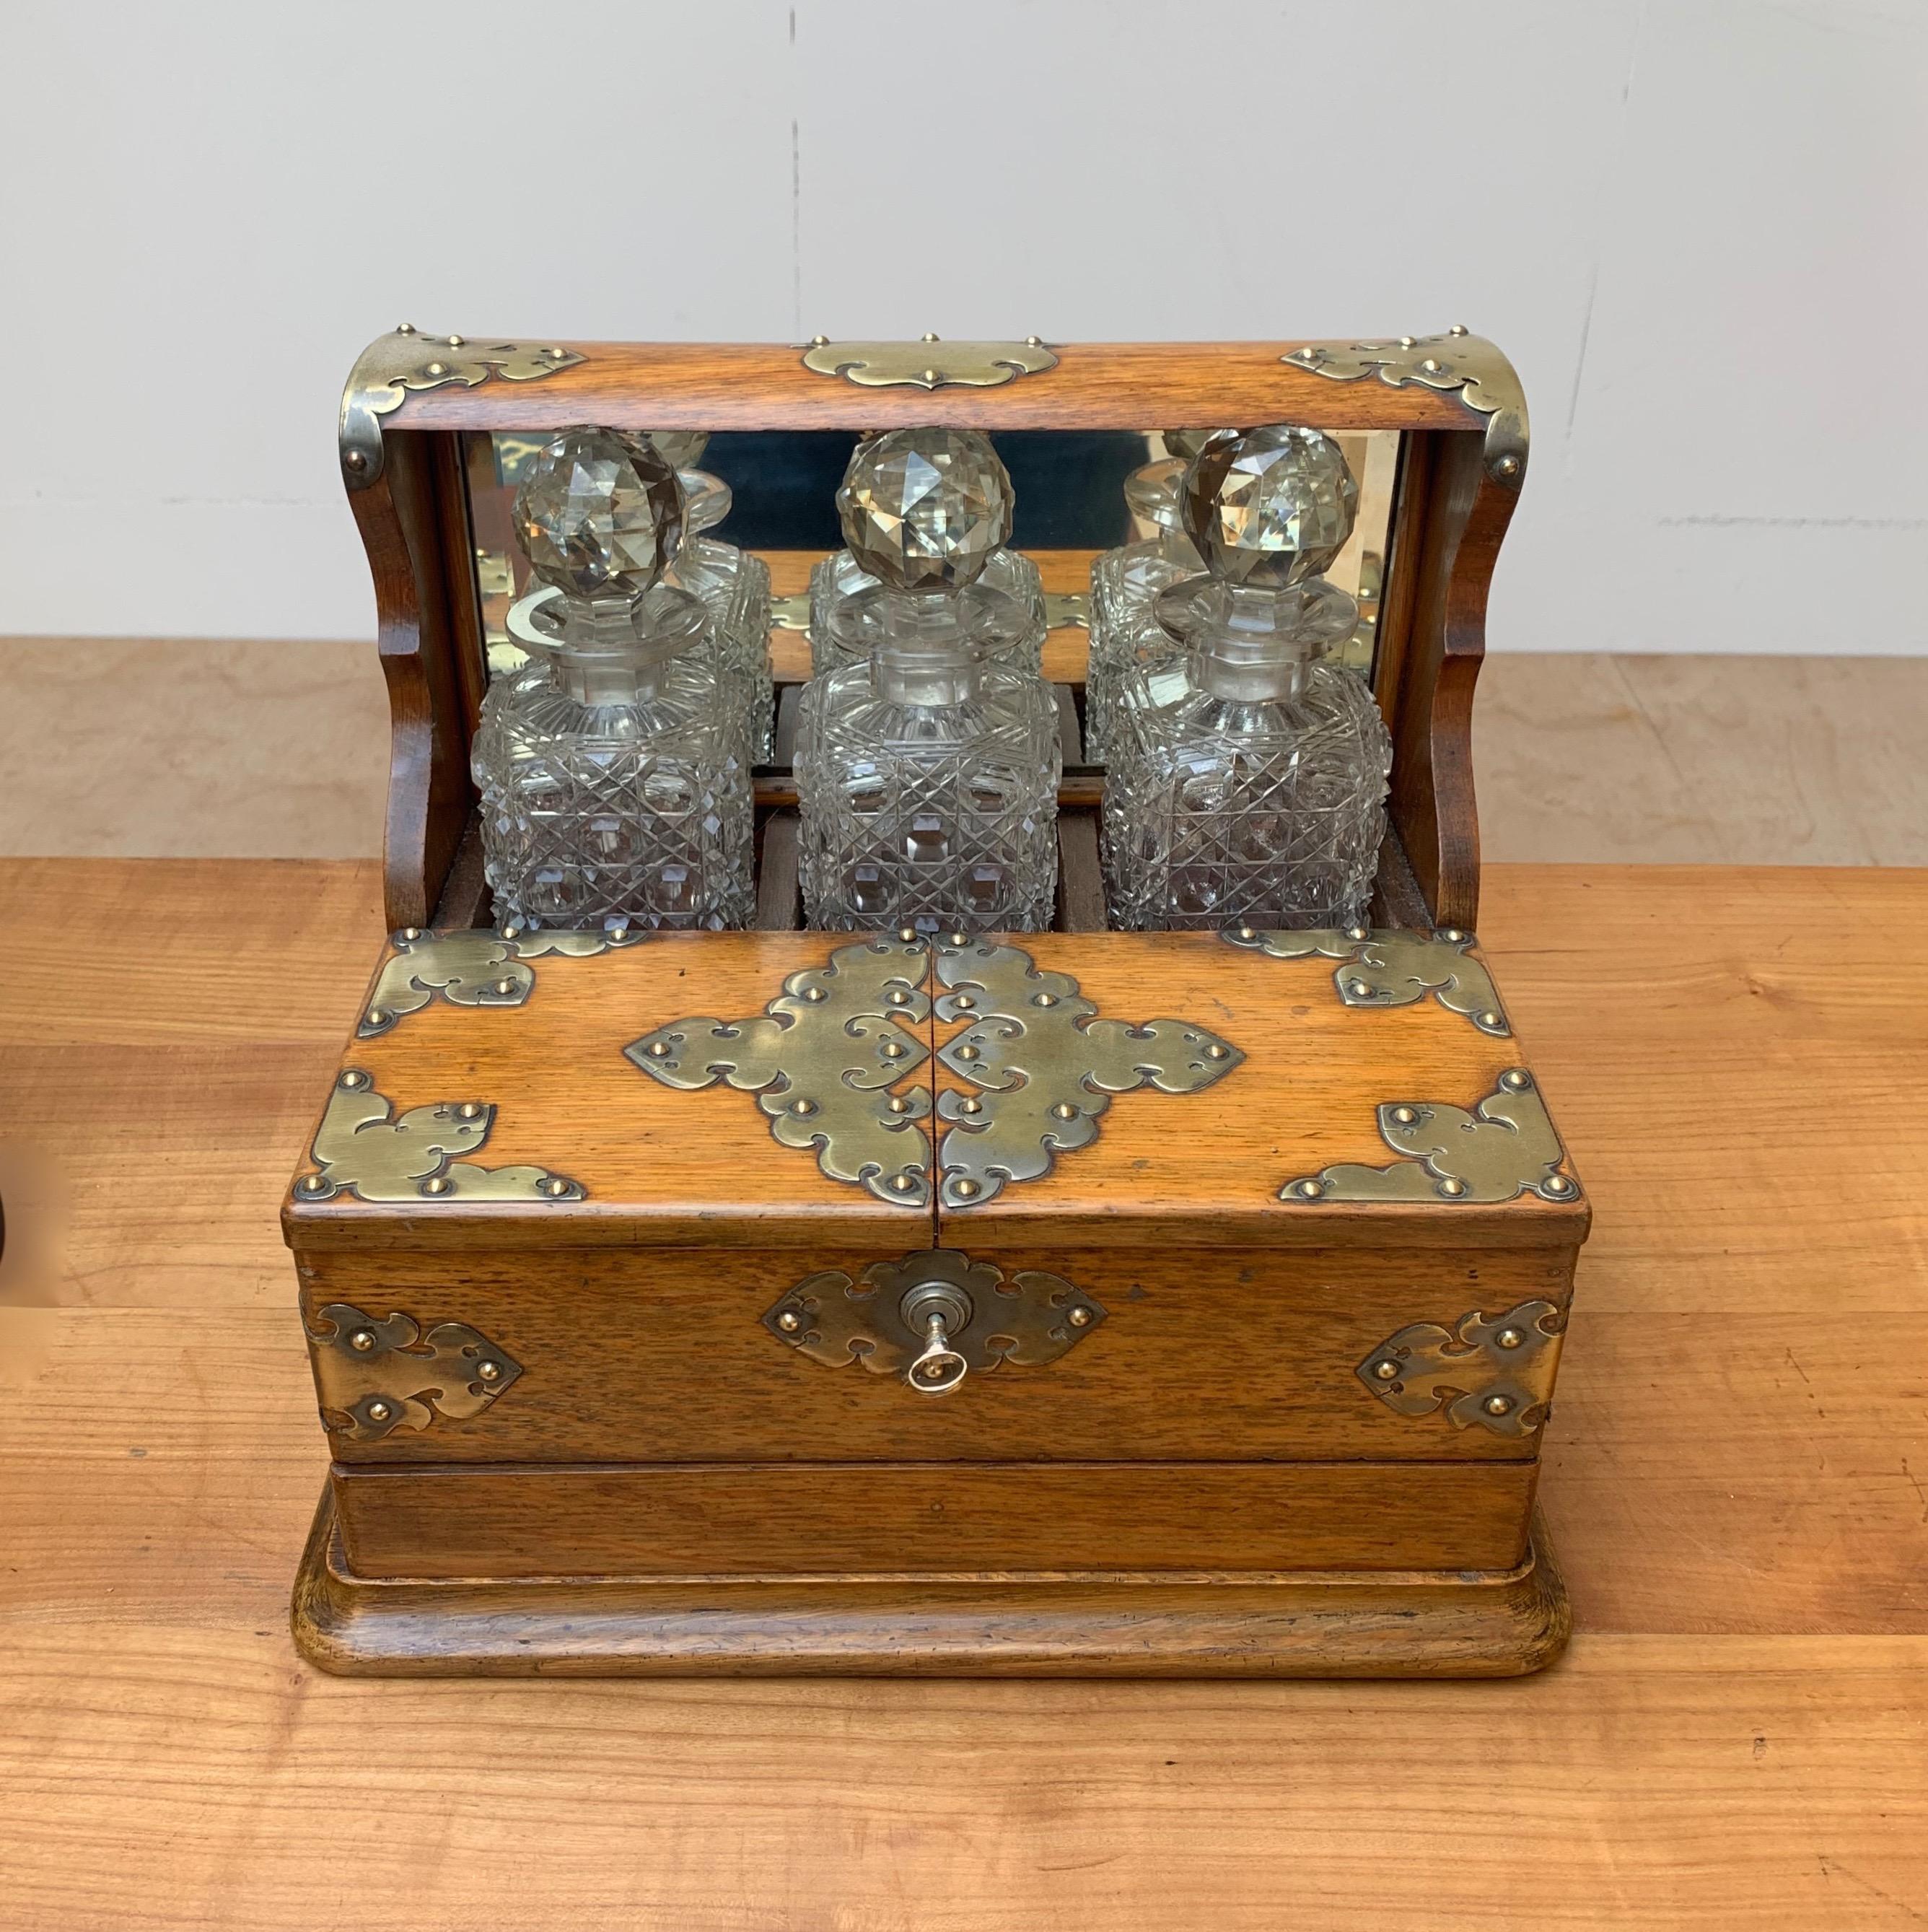 Good size and rare design, antique tantalus

This amazing condition and rare three crystal bottles holding Tantalus will look great everywhere. This hand-crafted work of beauty dates from the early 1900s and it comes with two folding lids with